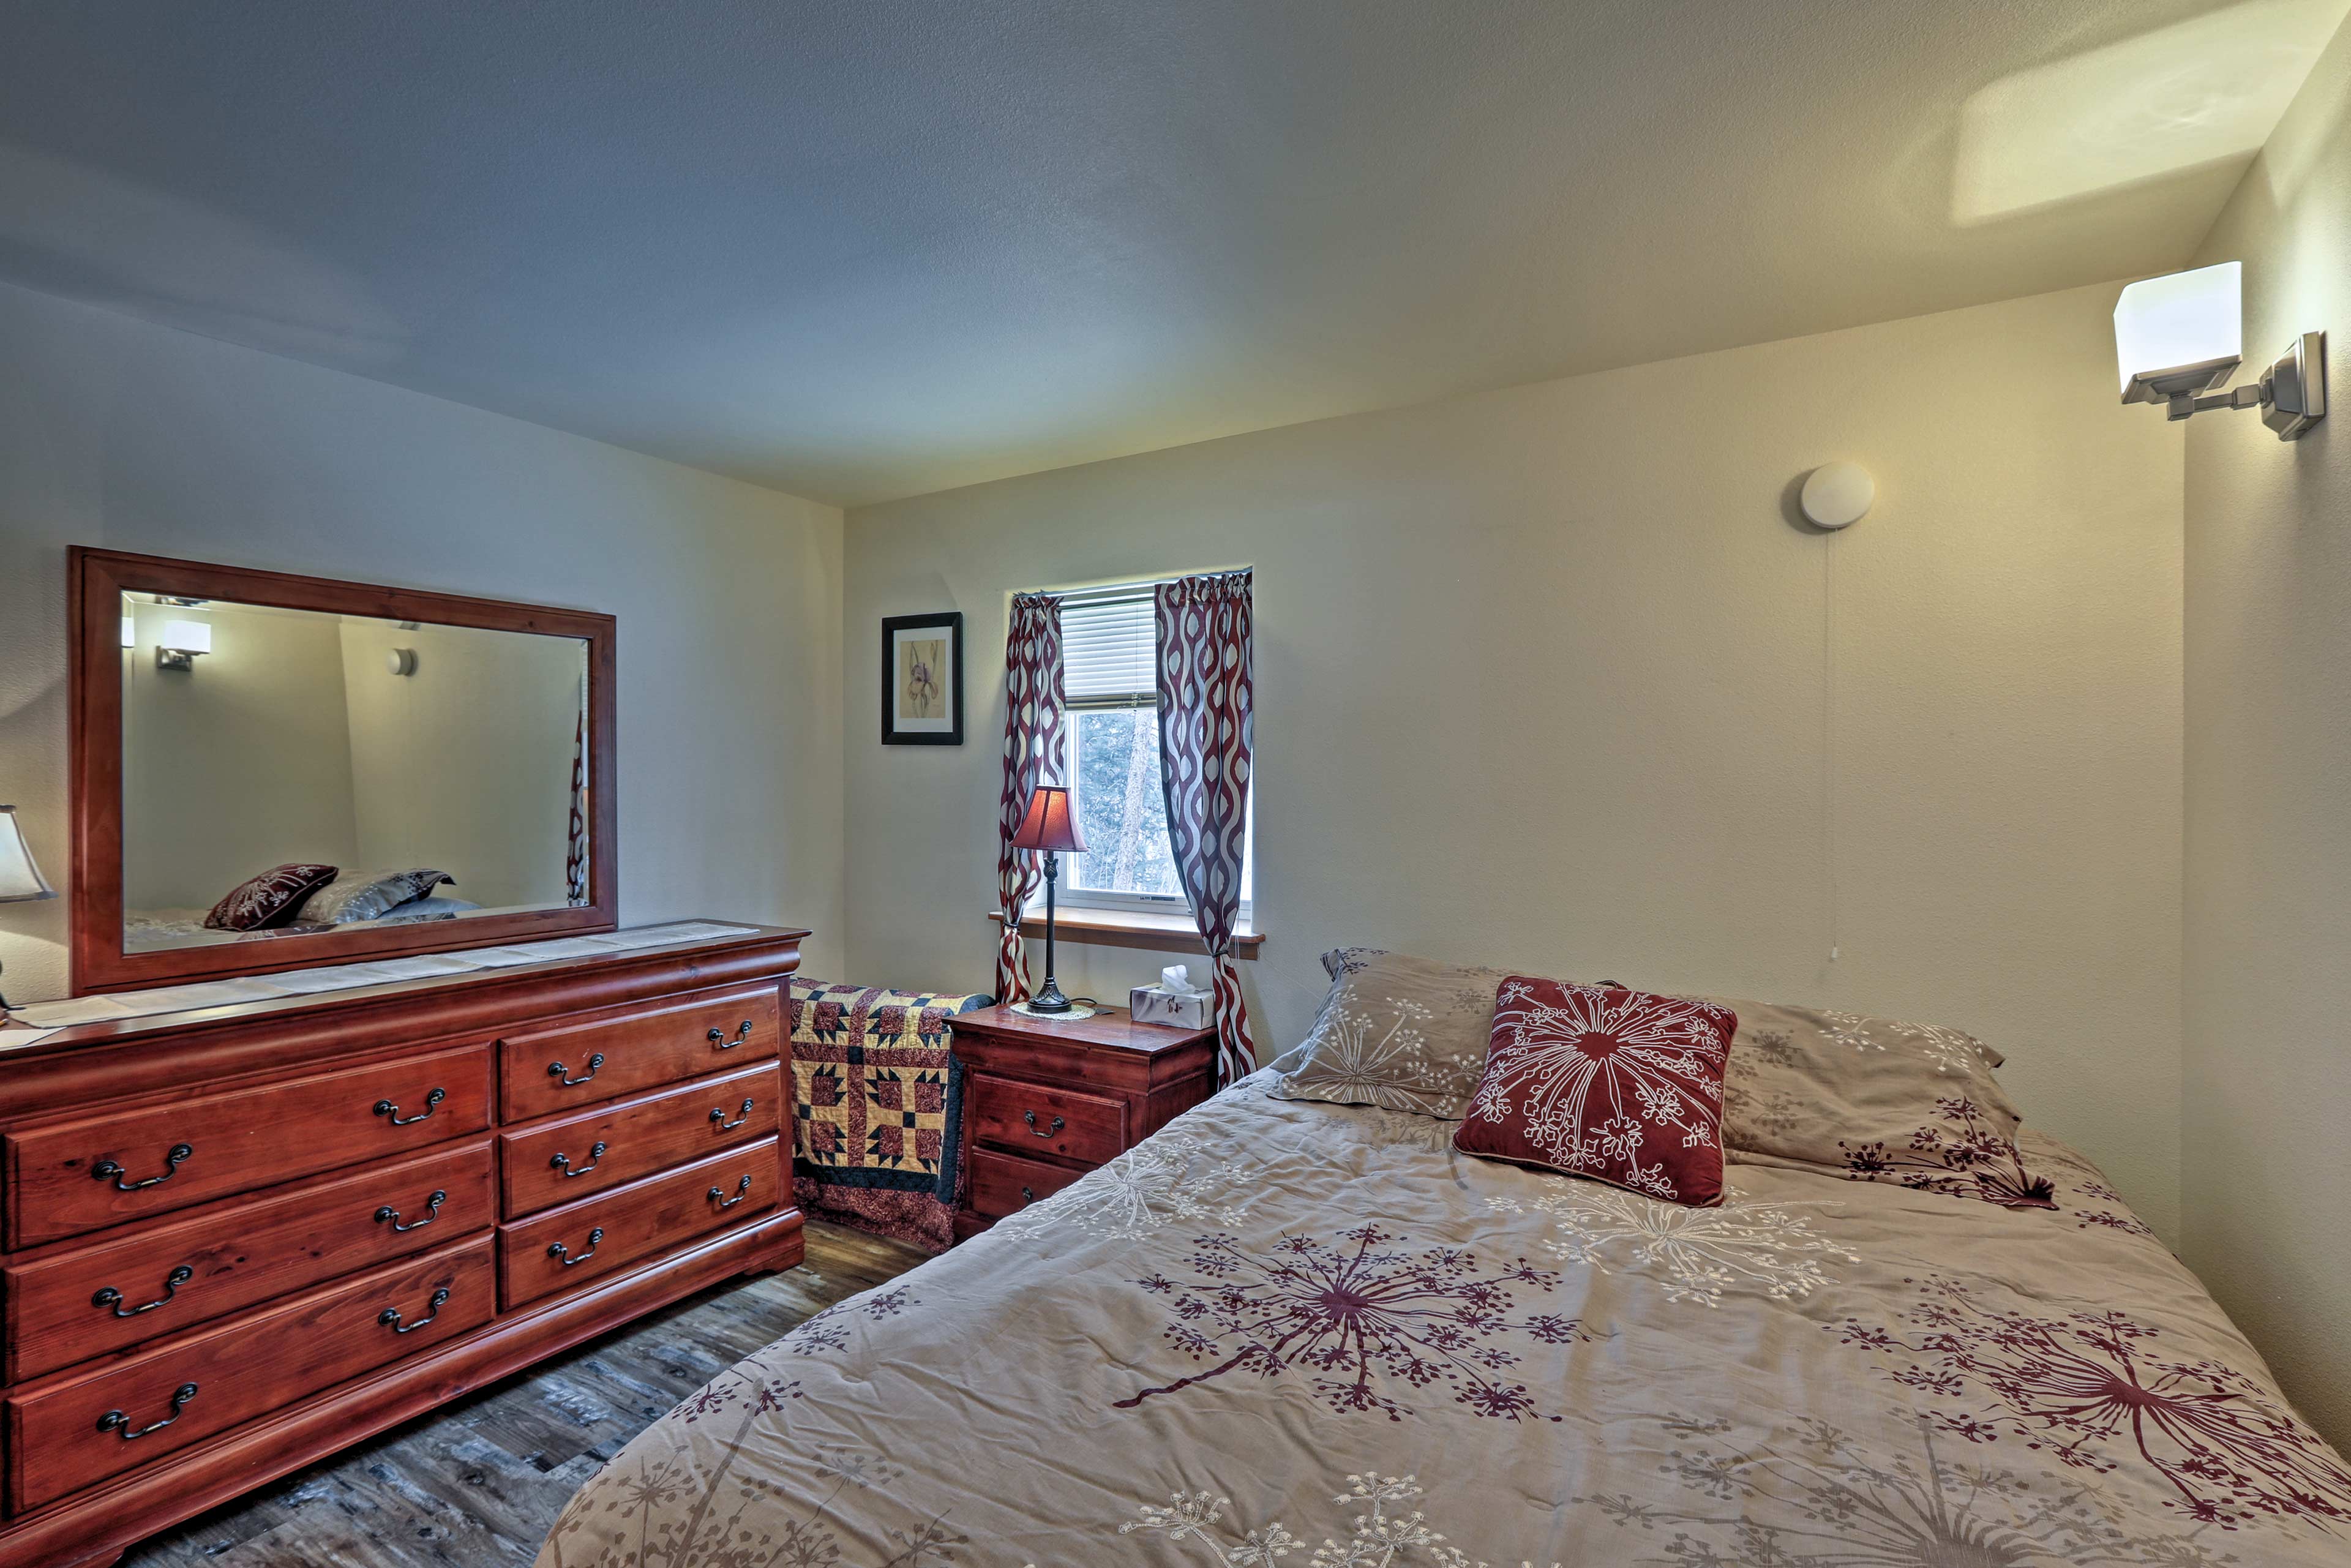 Wood furnishings highlight the second bedroom.